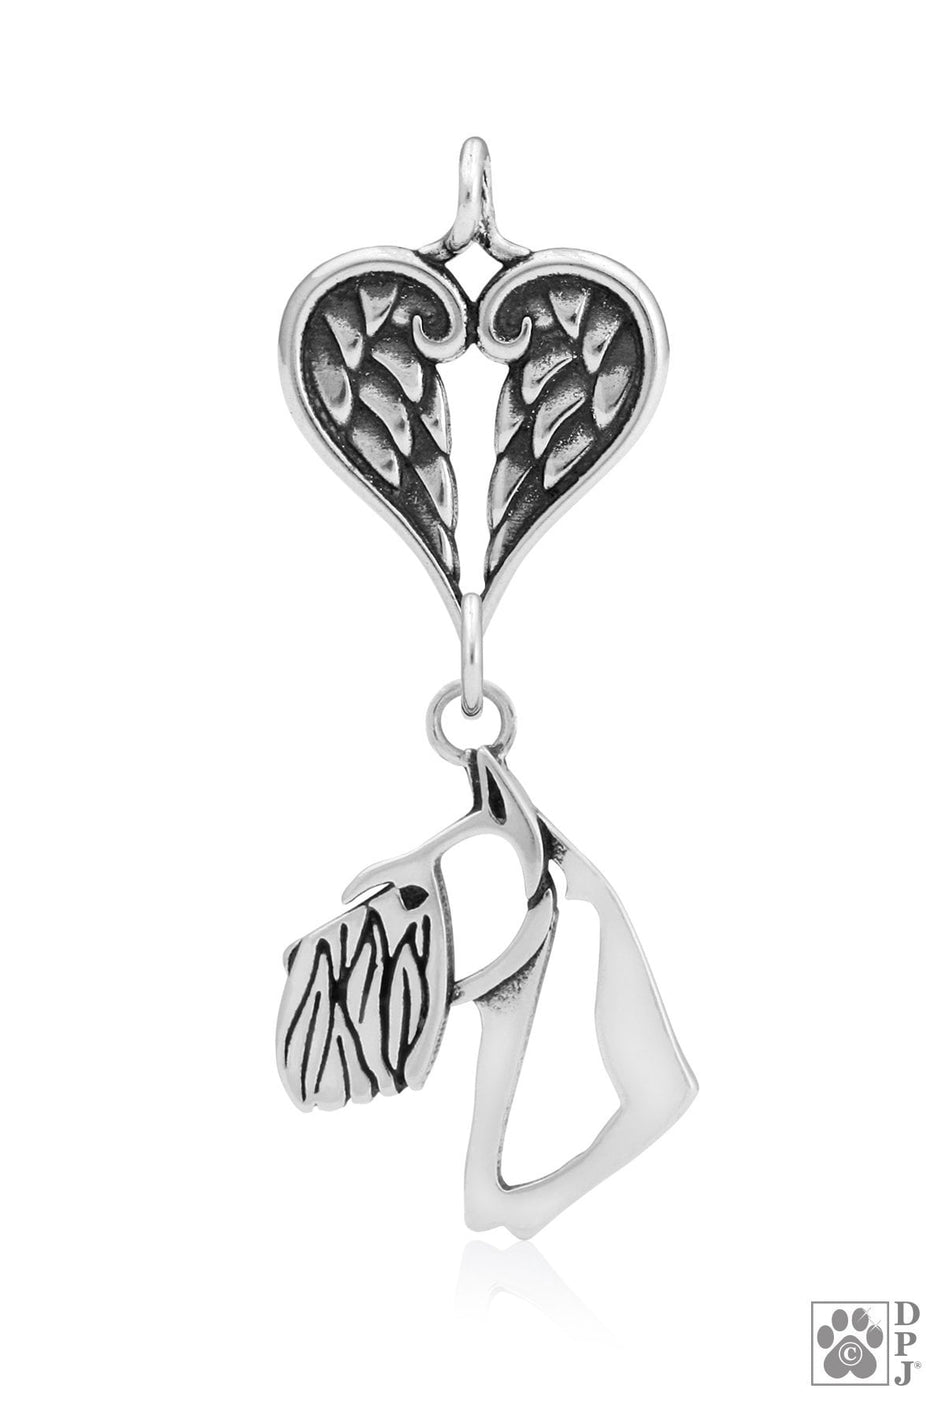 Schnauzer Cropped Ears, Head, with Engravable Healing Angels Pendant